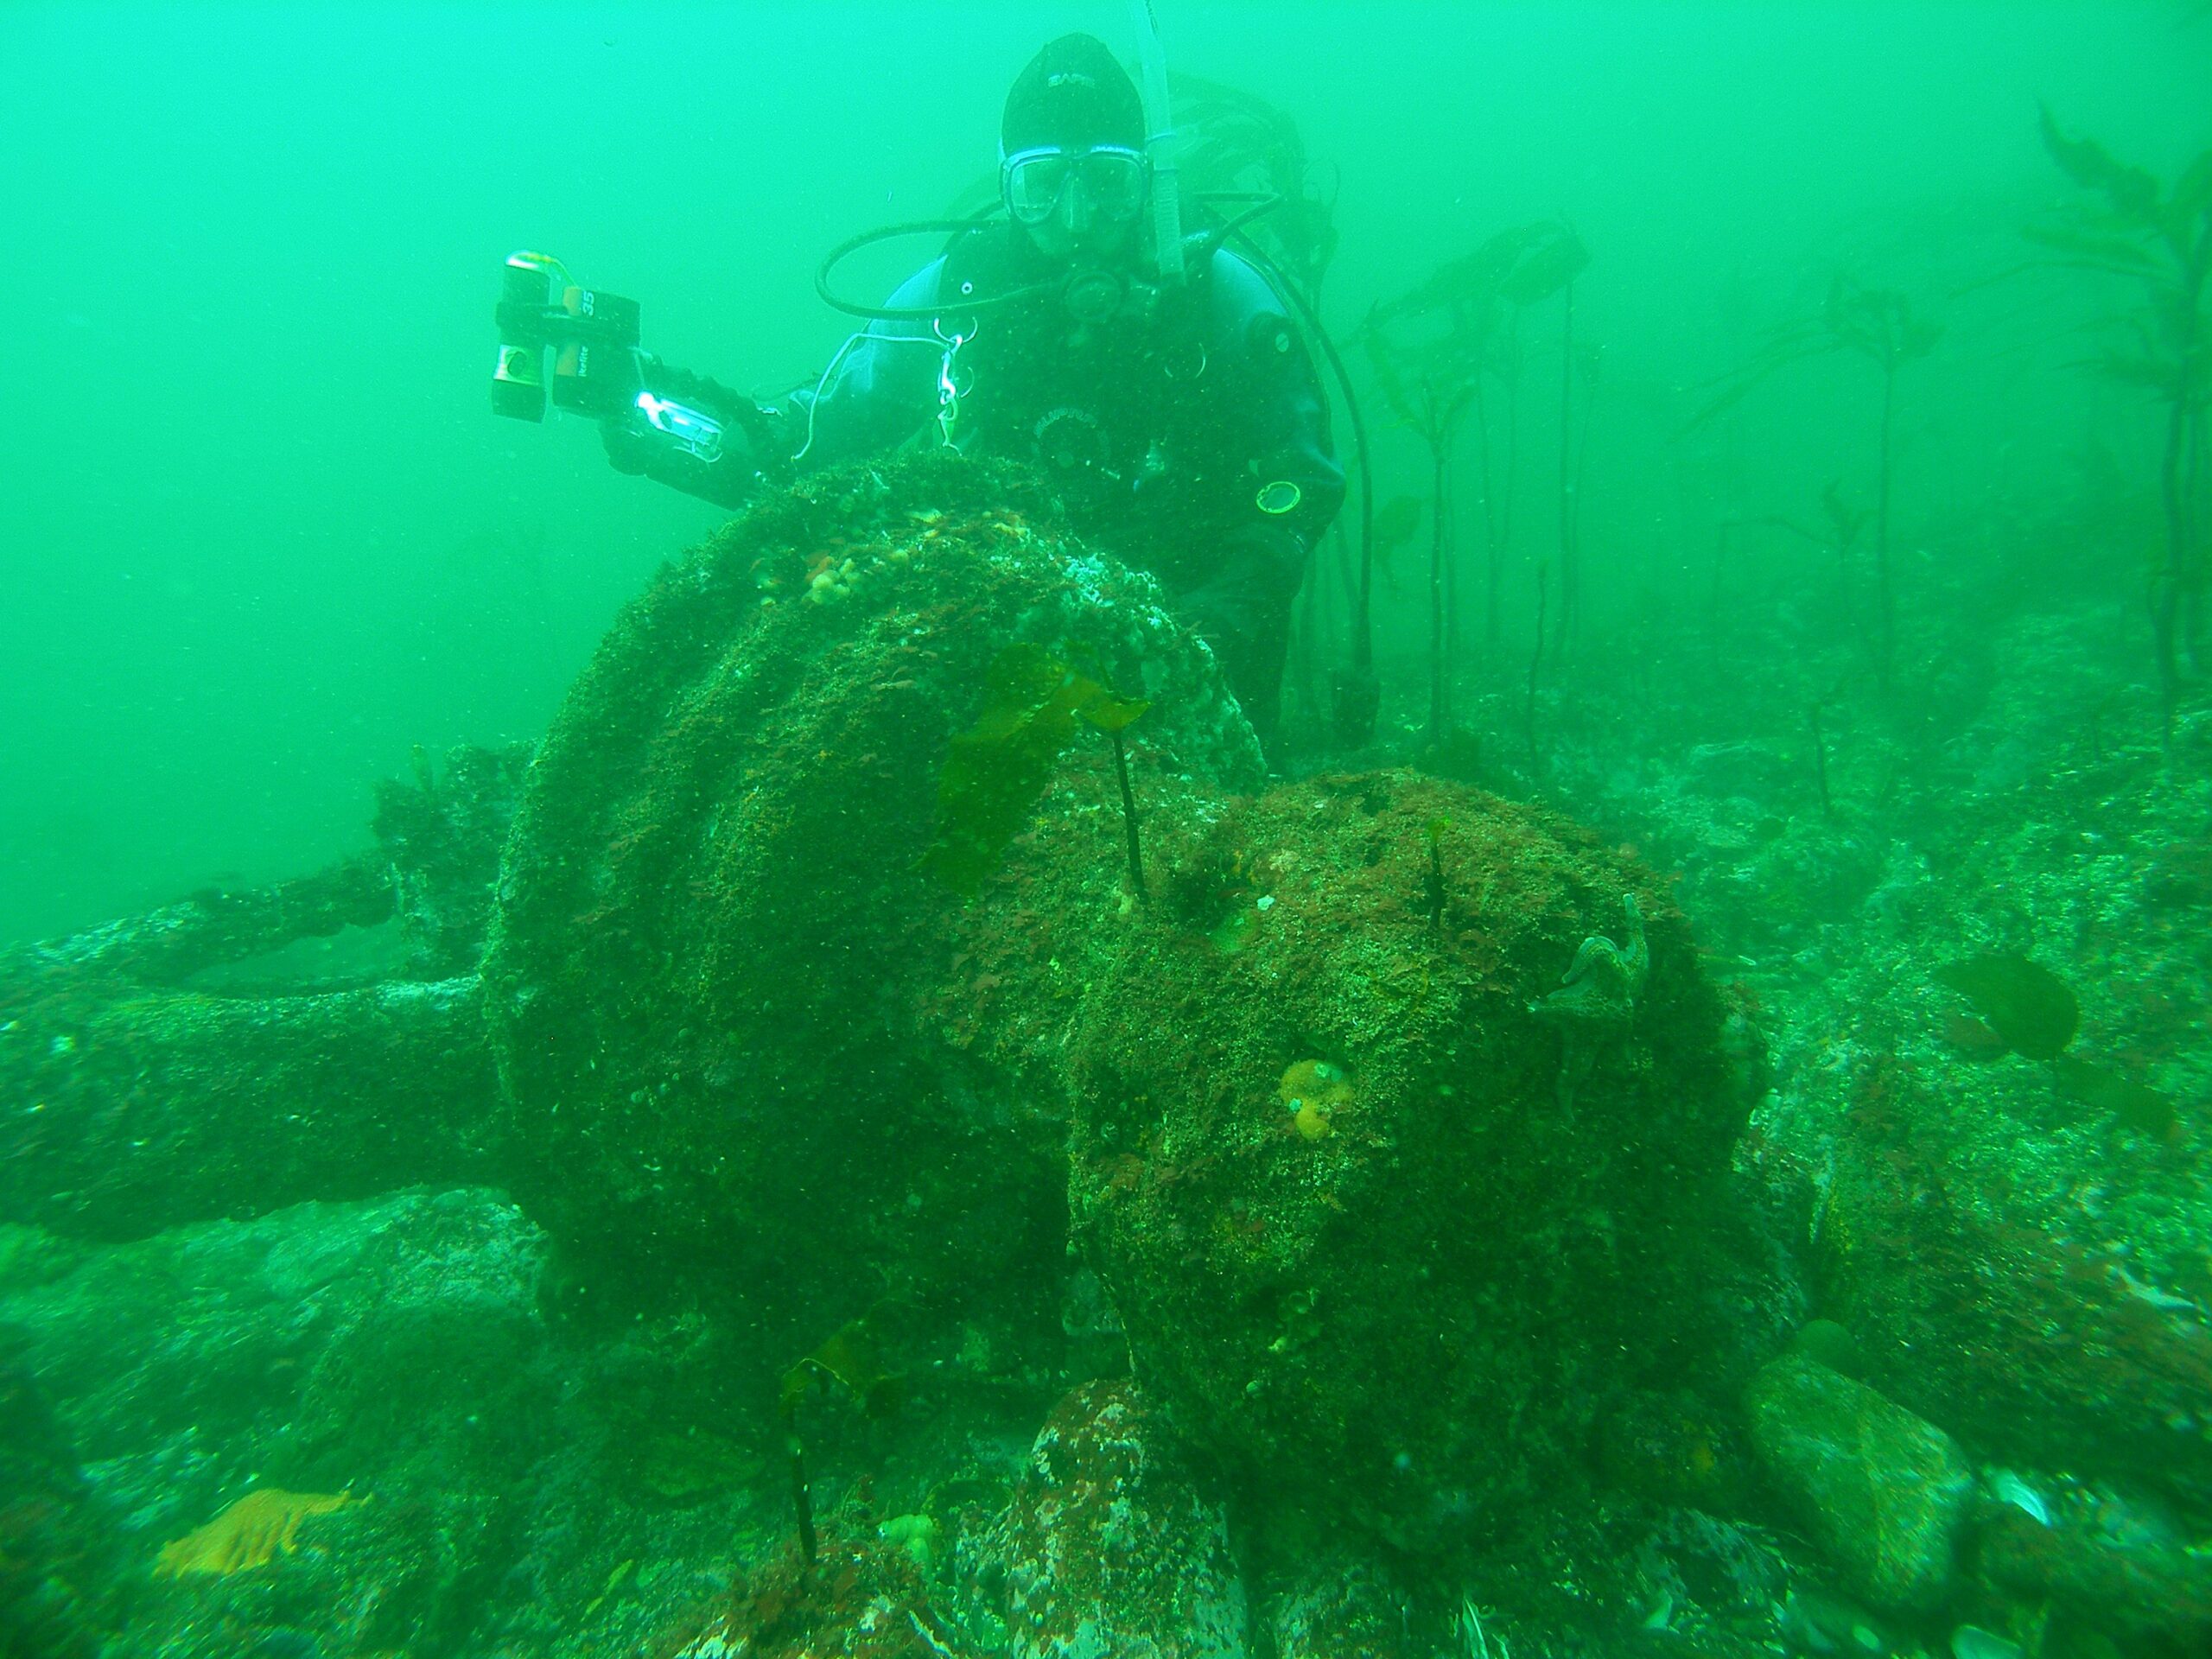 Diver posing on top of the rusted Melfort Capstan at the bottom of the ocean